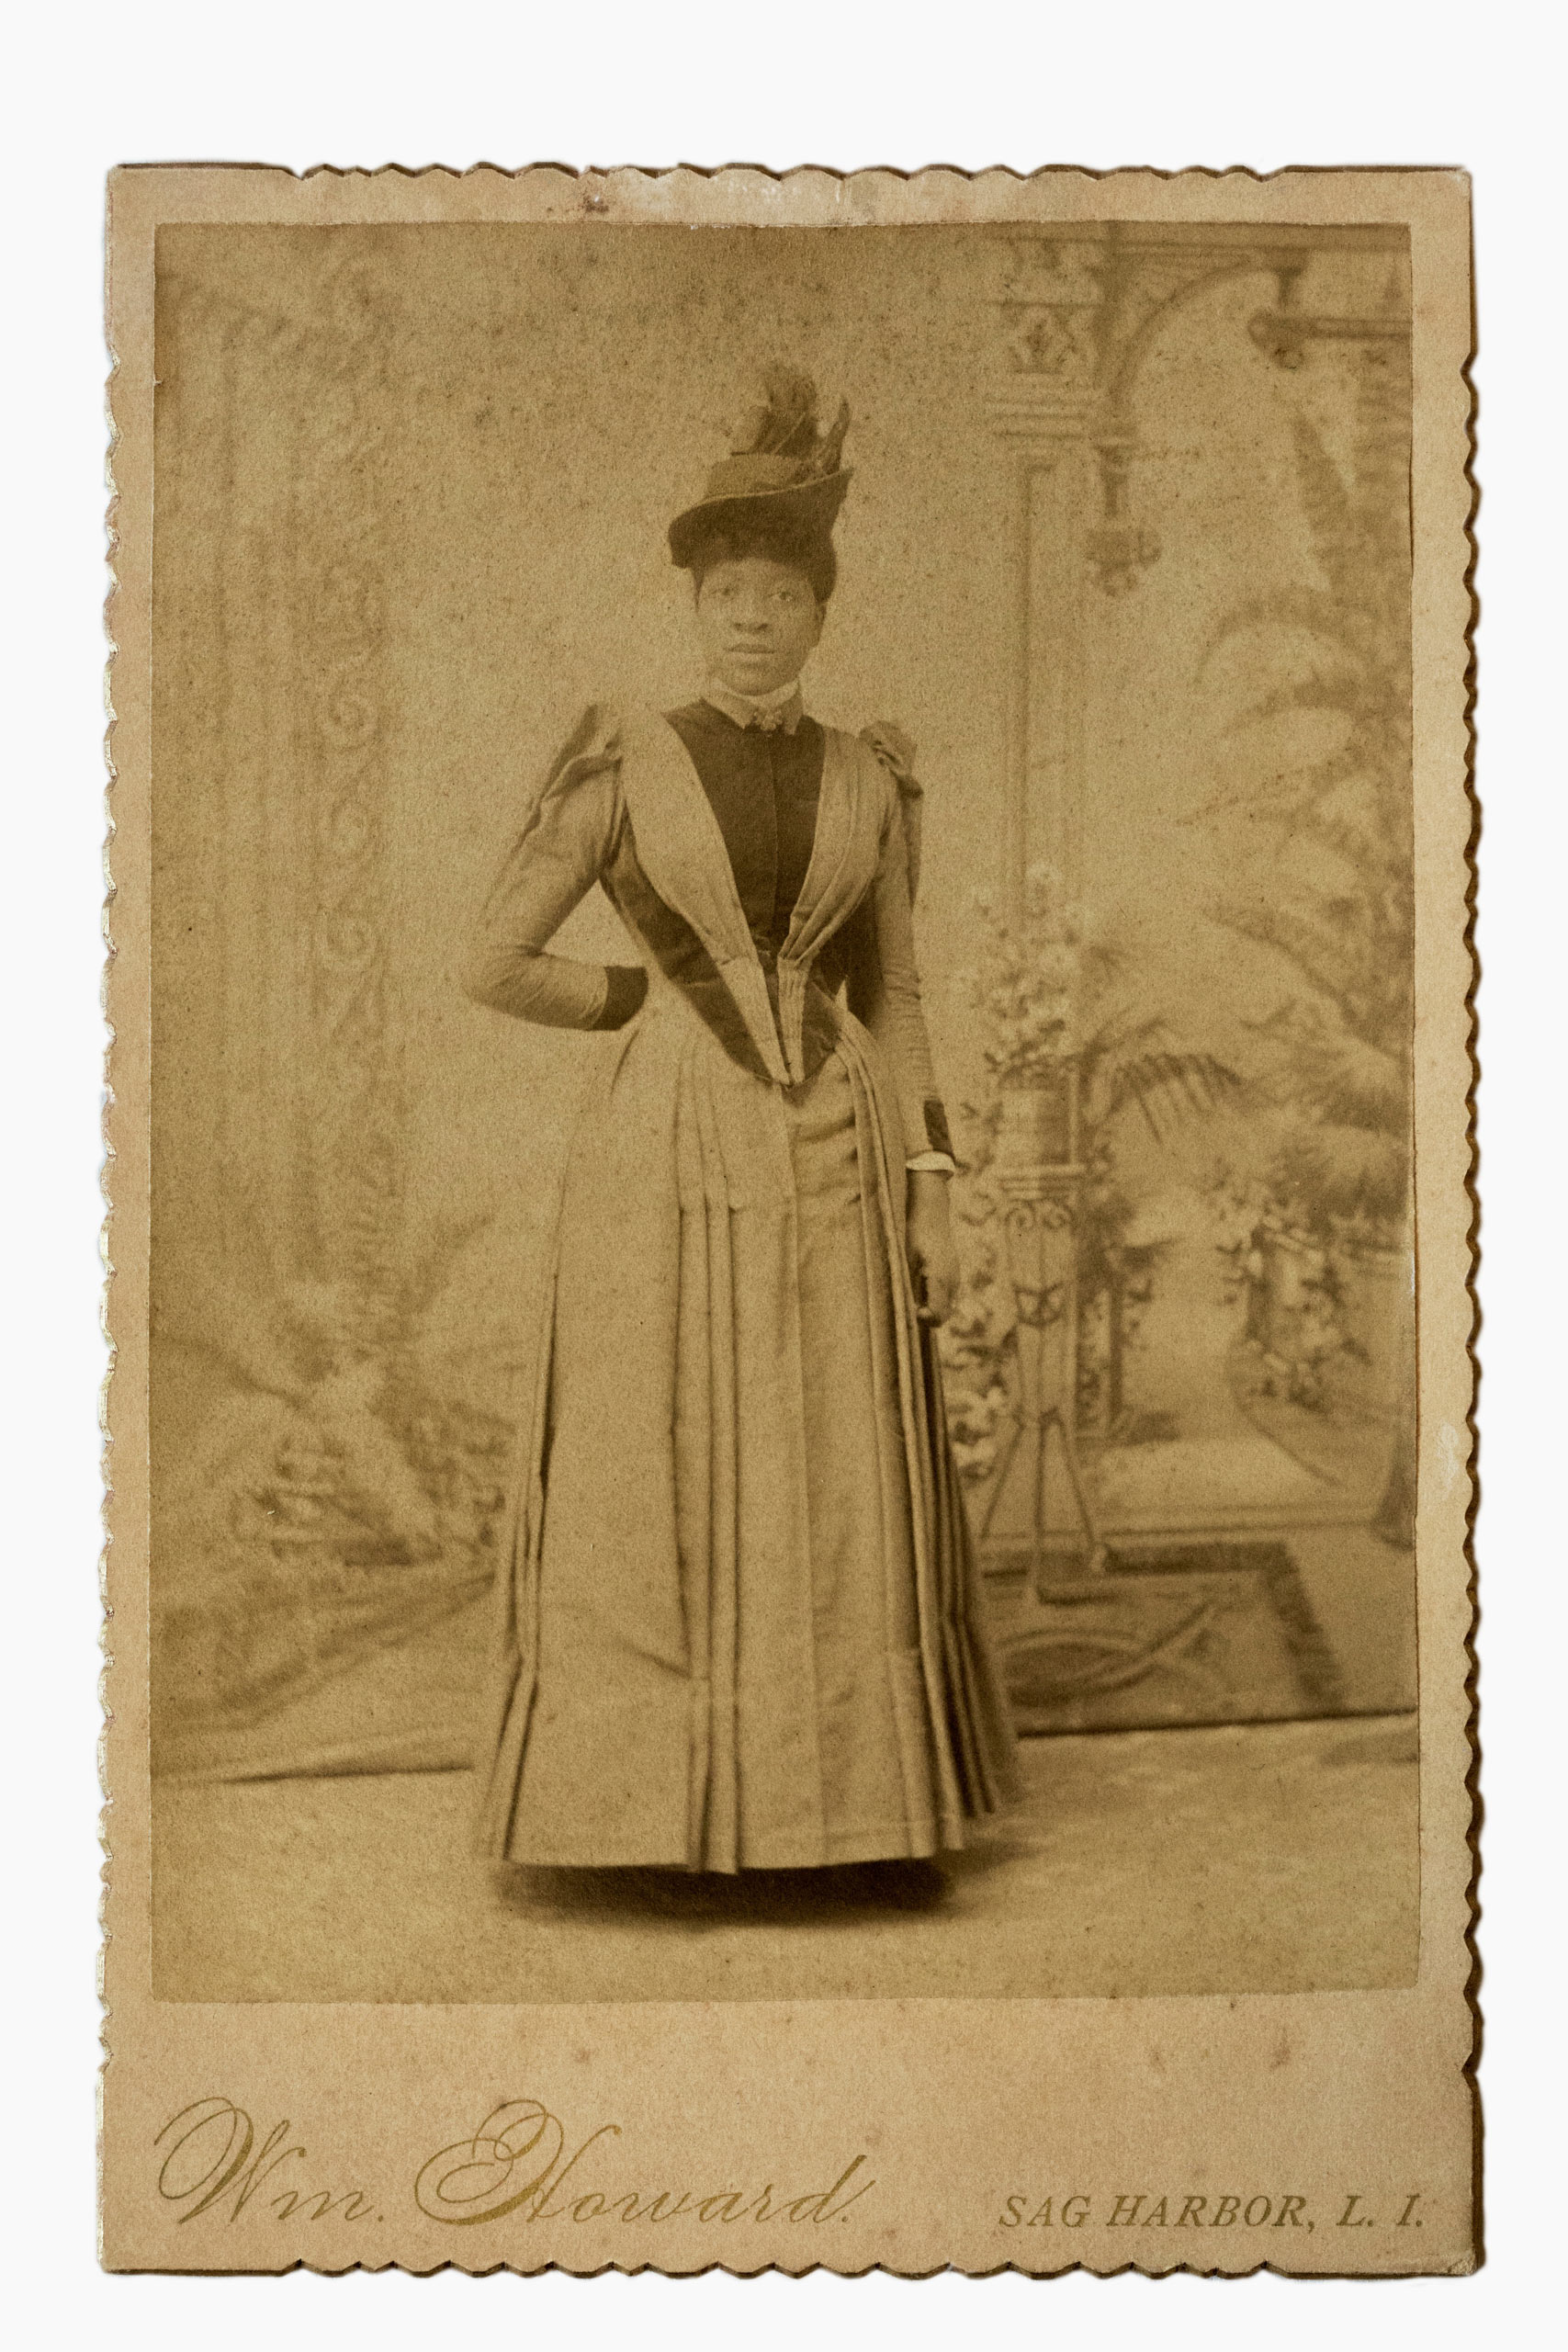 Daughter of Esther Green, born between 1850 and 1860 in Eastville, N.Y.